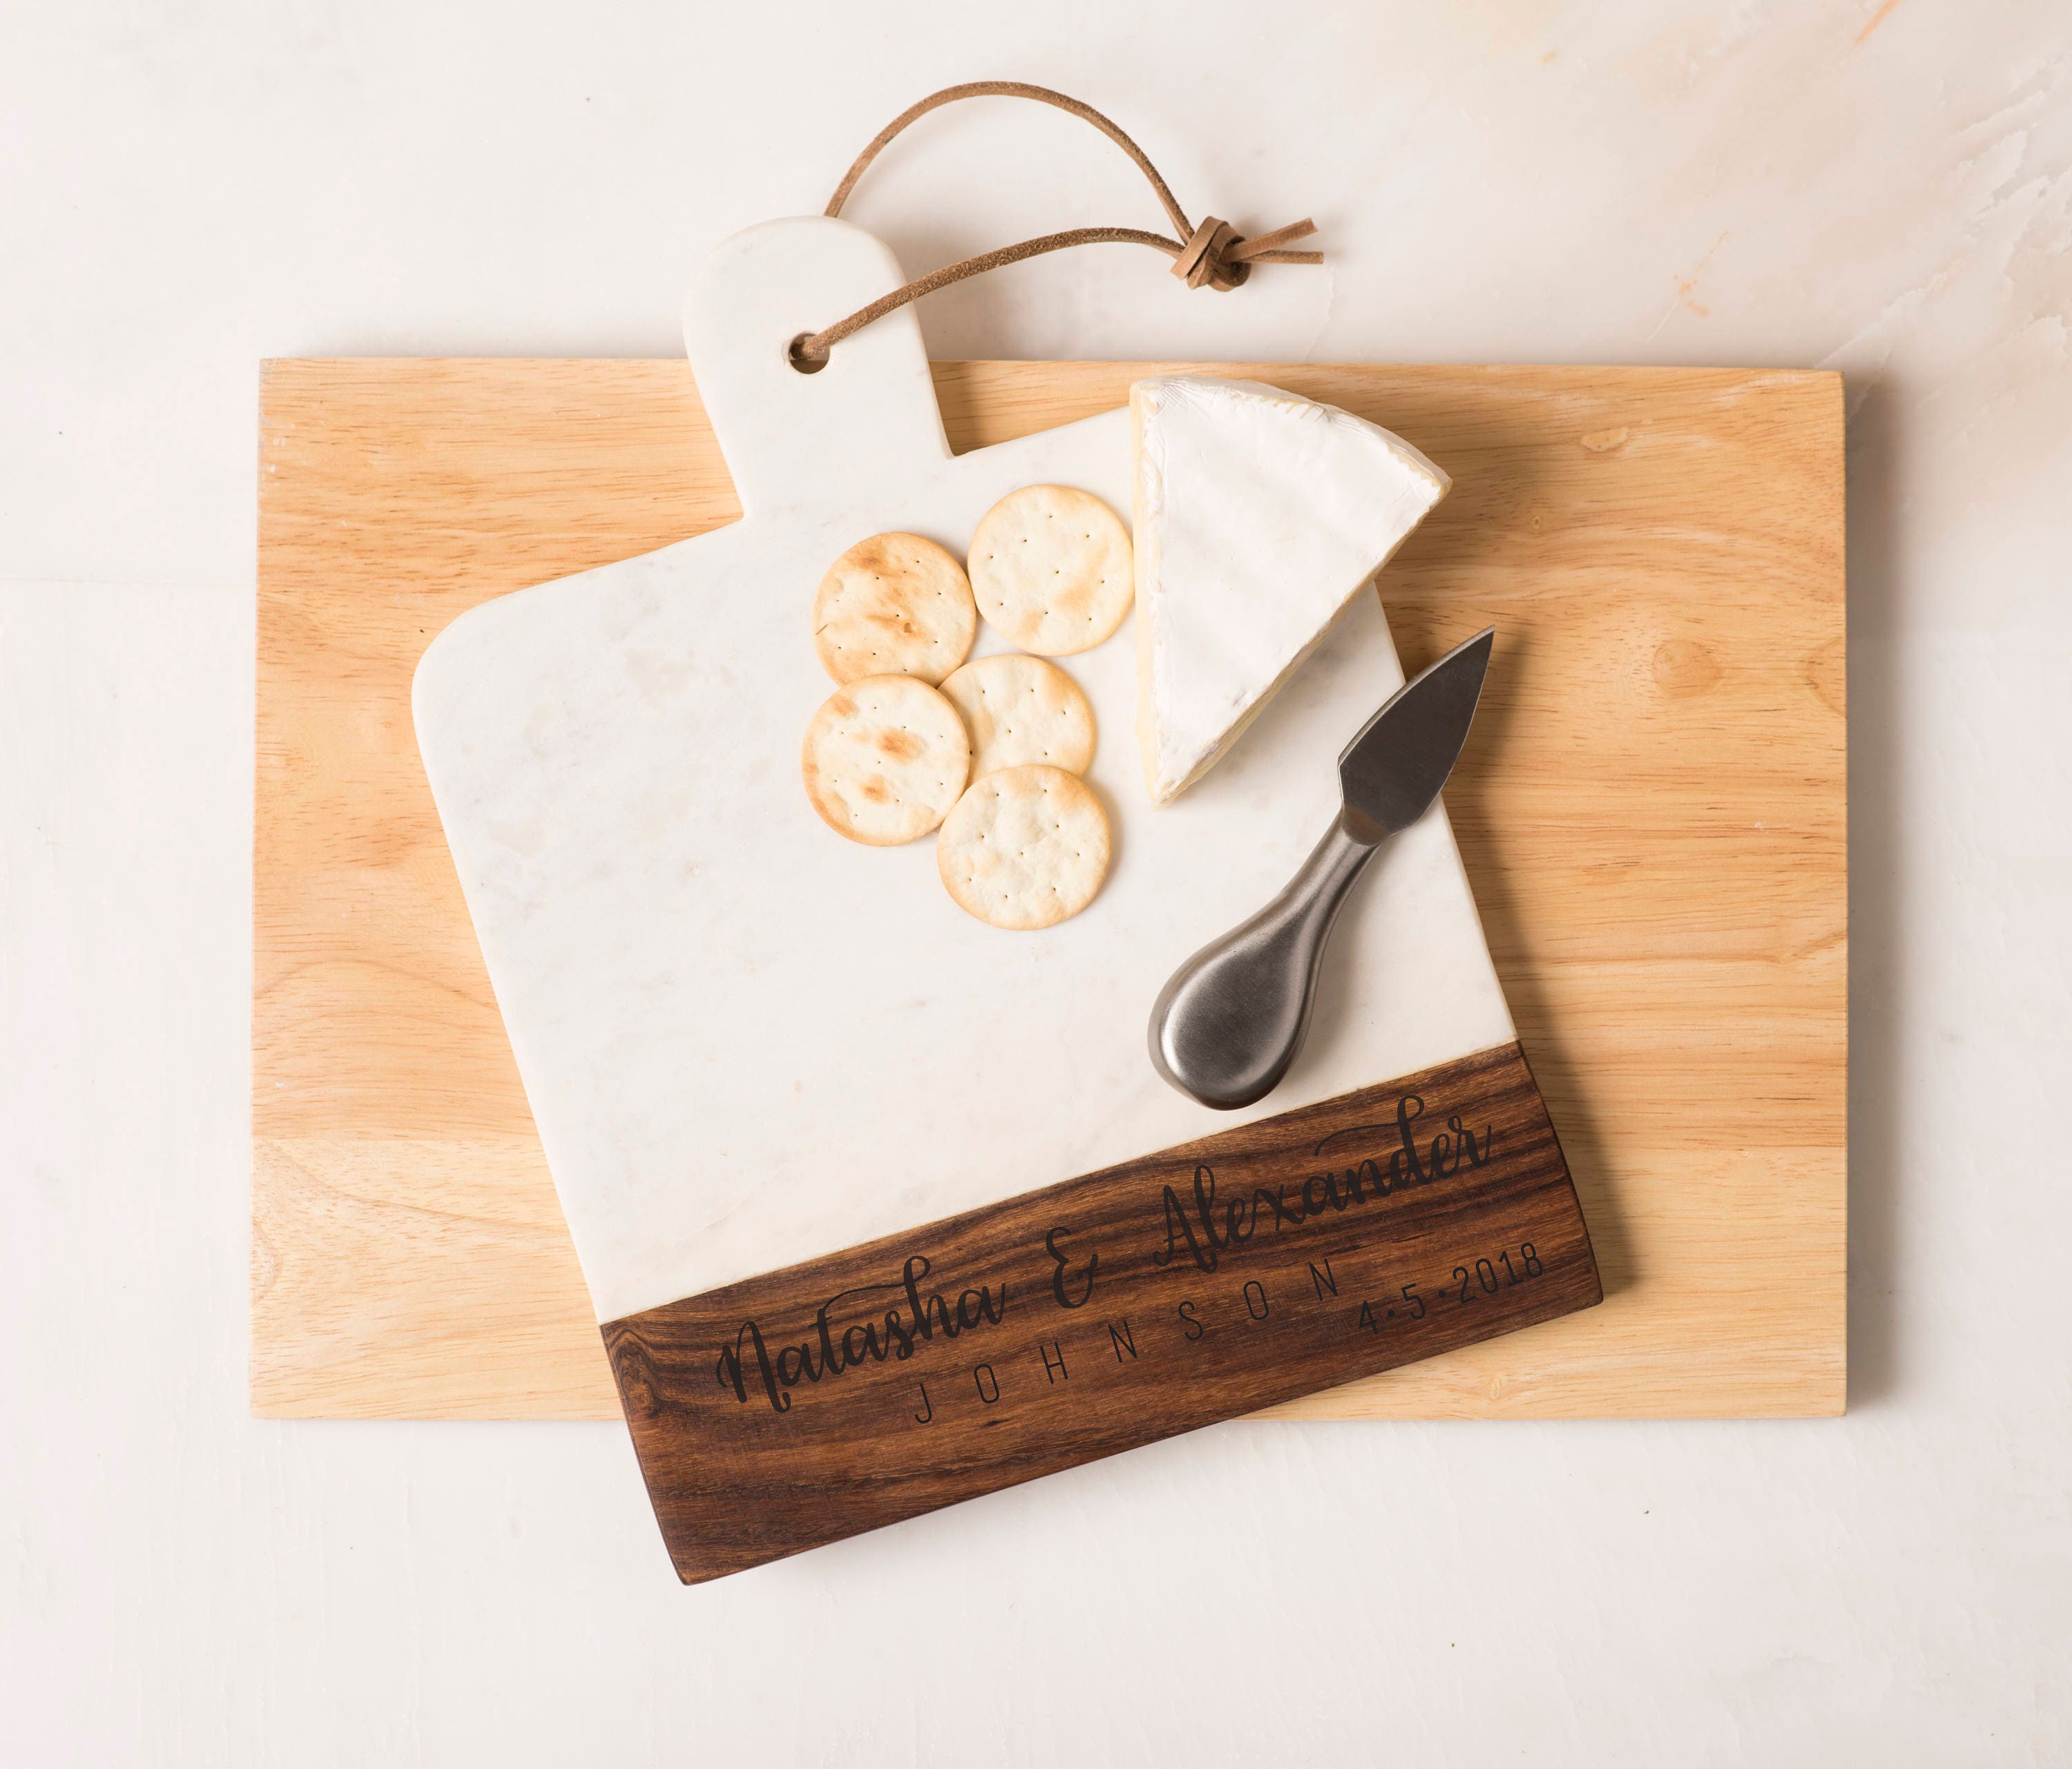 Mom Birthday Gift: Custom Engraved Cheese Board for Kitchen